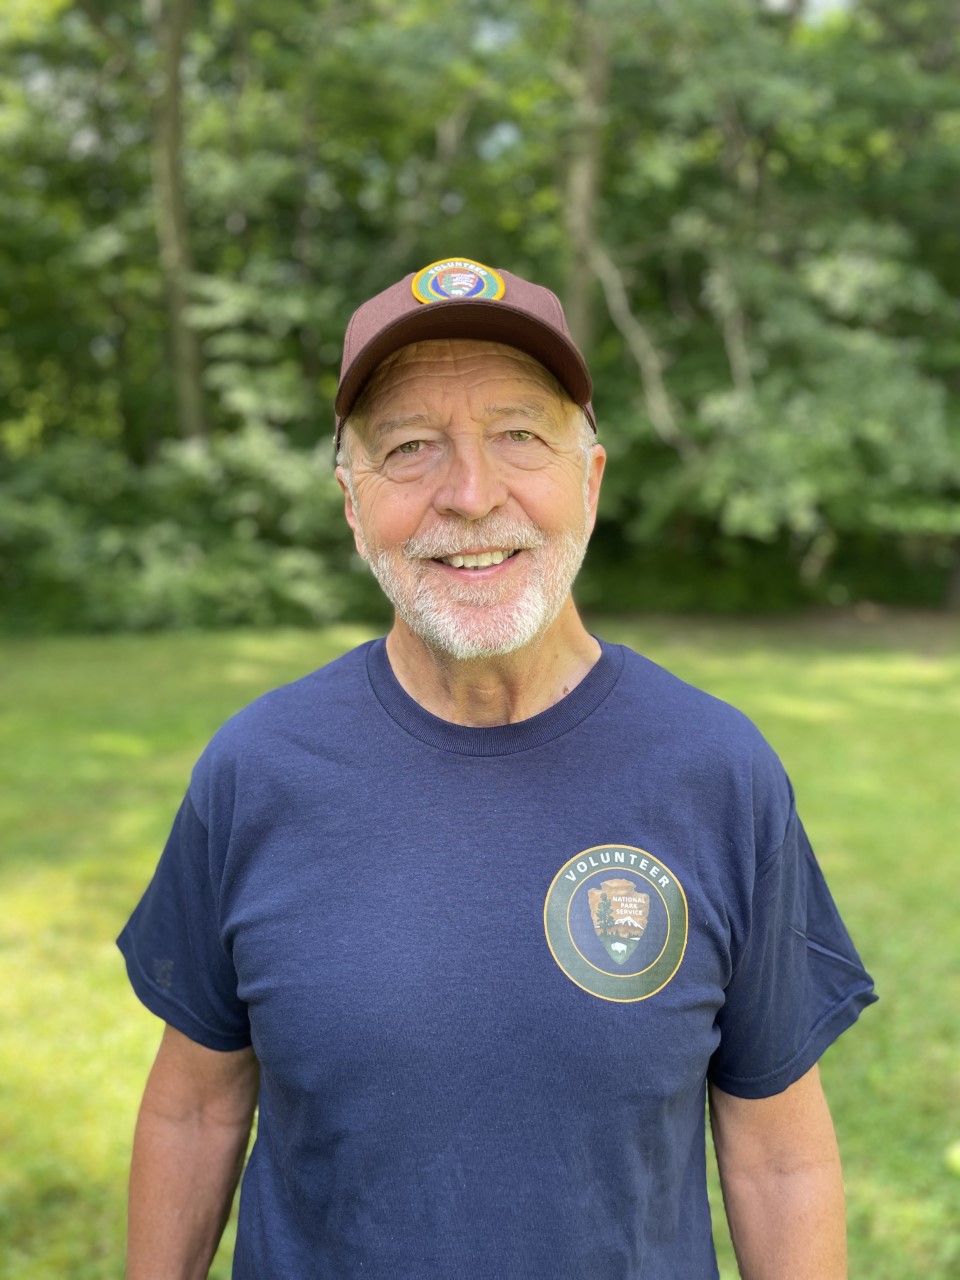 Rob Albrecht-Mallinger, is the national recipient of the National Park Service’s George and Helen Hartzog Award for Outstanding Volunteer Service.